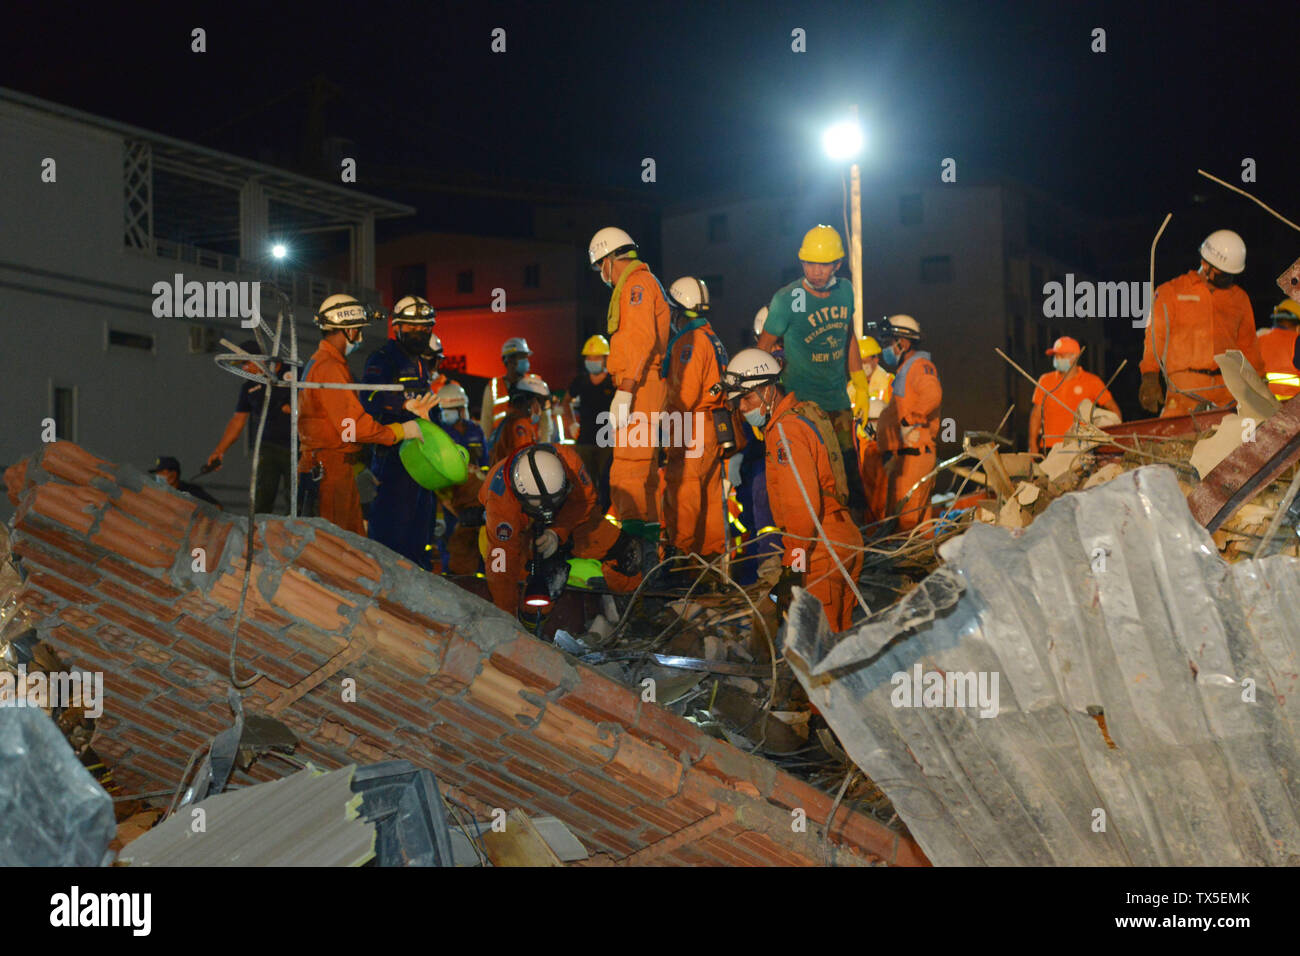 Phnom Penh, Cambodia. 24th June, 2019. Rescuers search for trapped people in a collapsed building in Sihanoukville city in Preah Sihanouk province, Cambodia on June 24, 2019. The death toll in the collapse of a seven-story under-construction building in southwestern Cambodia's Preah Sihanouk Province early Saturday, has risen to 25, according to the latest report released by the rescue team on Monday. Credit: Li Lay/Xinhua/Alamy Live News Stock Photo